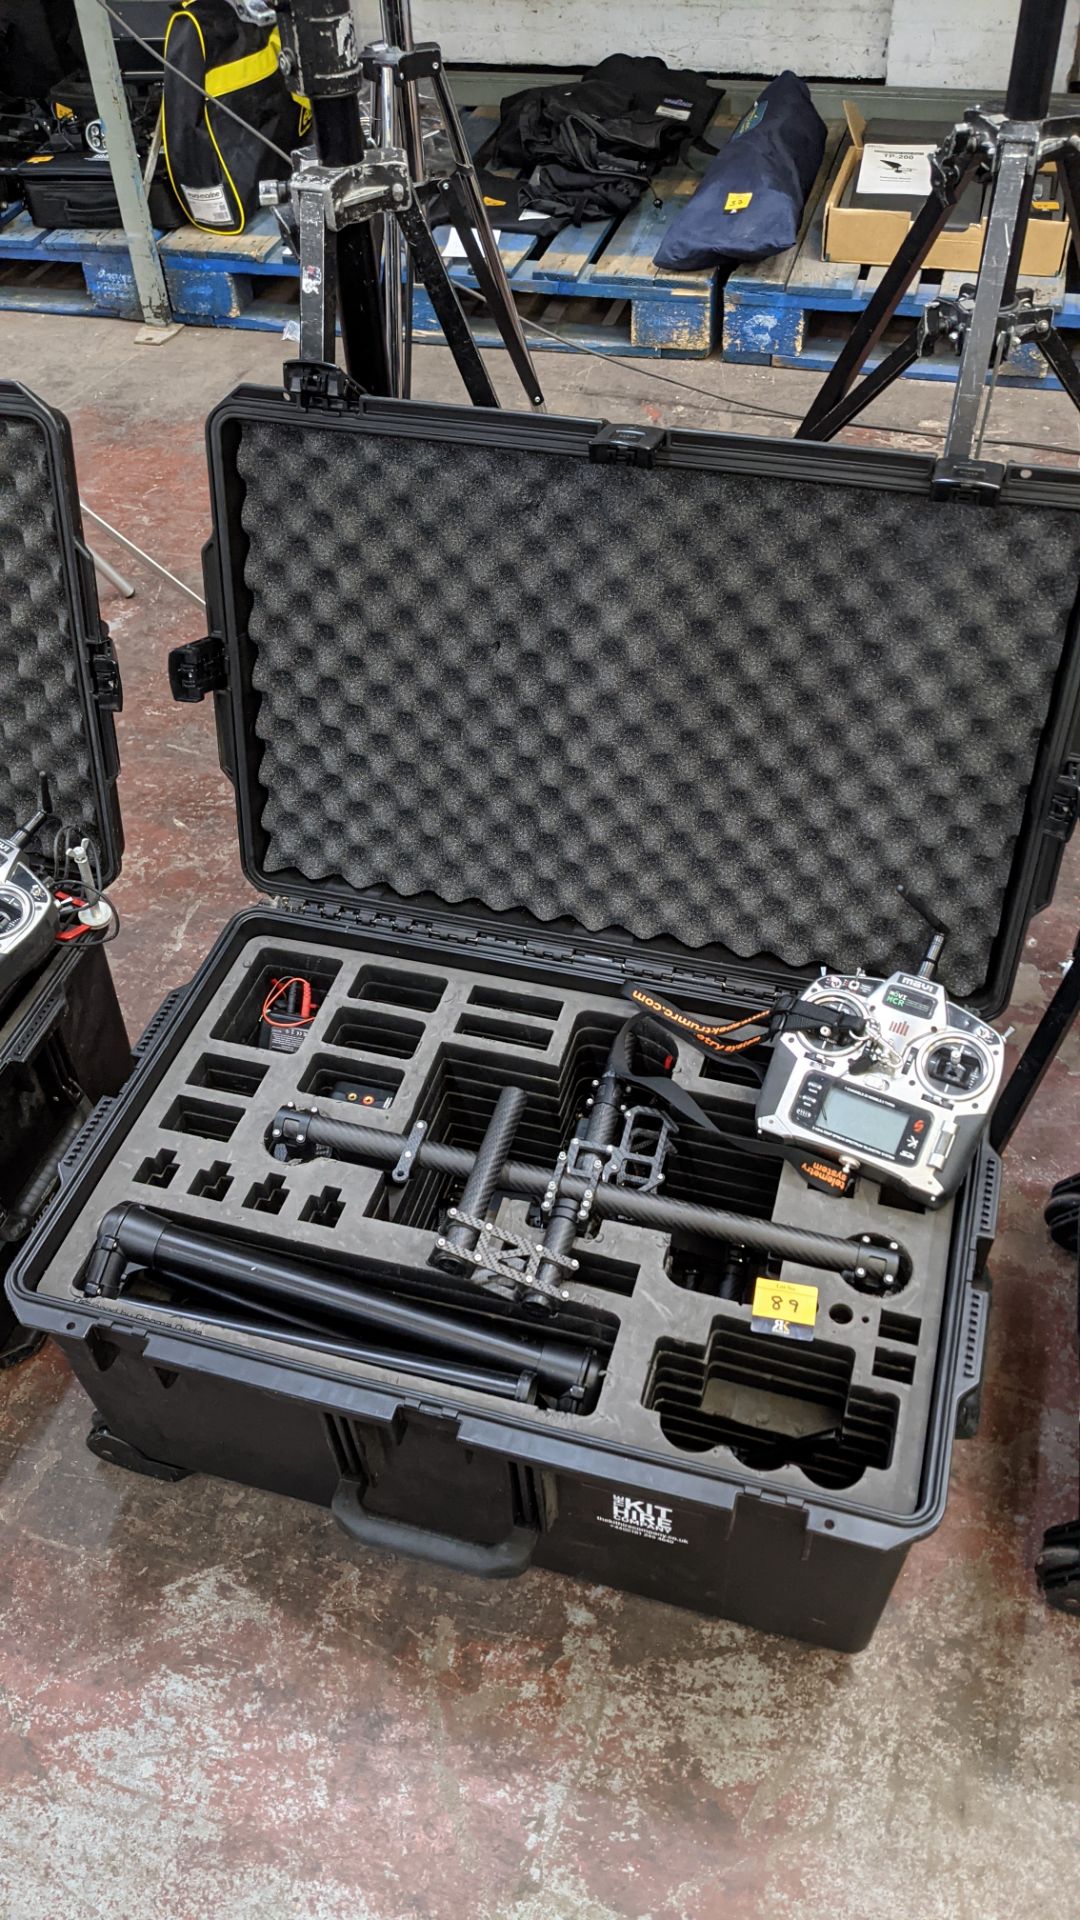 Freefly Movi M10 gimbal system with remote control including large case designed by Cinema Oxide - Image 2 of 16